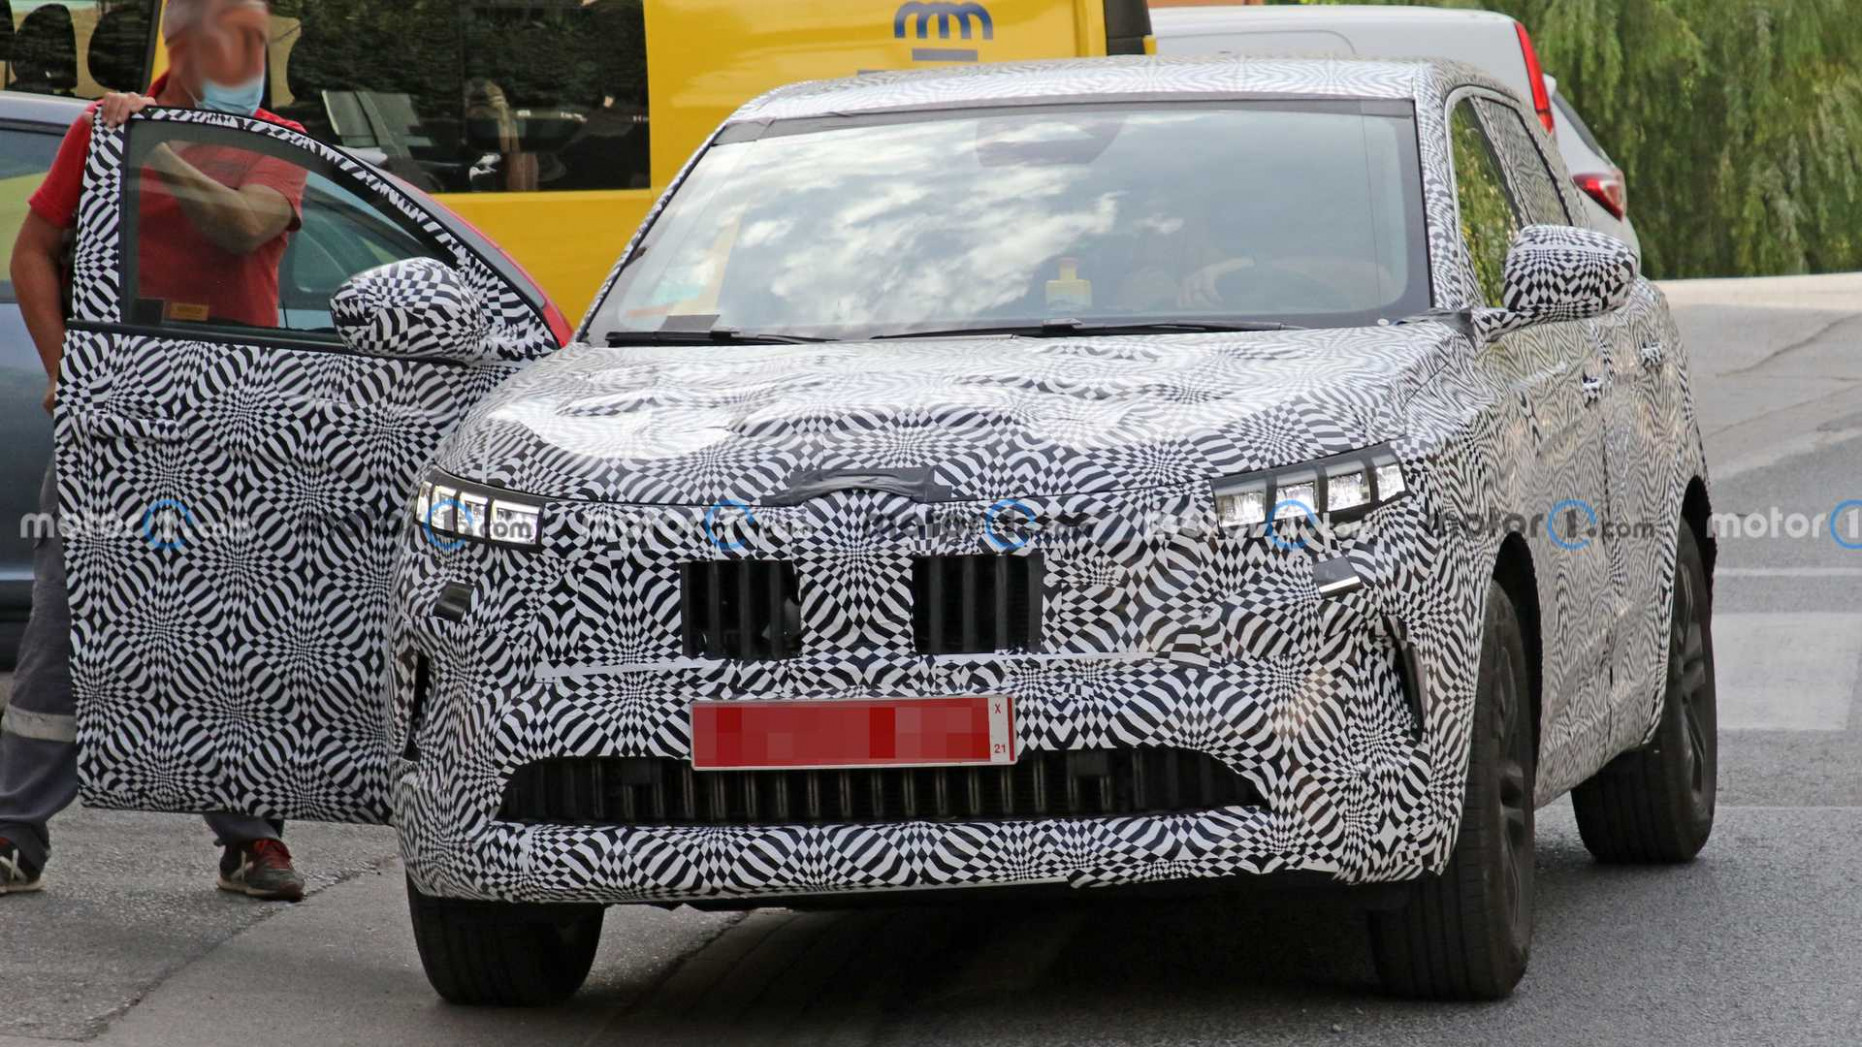 Renault Kadjar Spied Inside And Out Getting Ready For New Generation